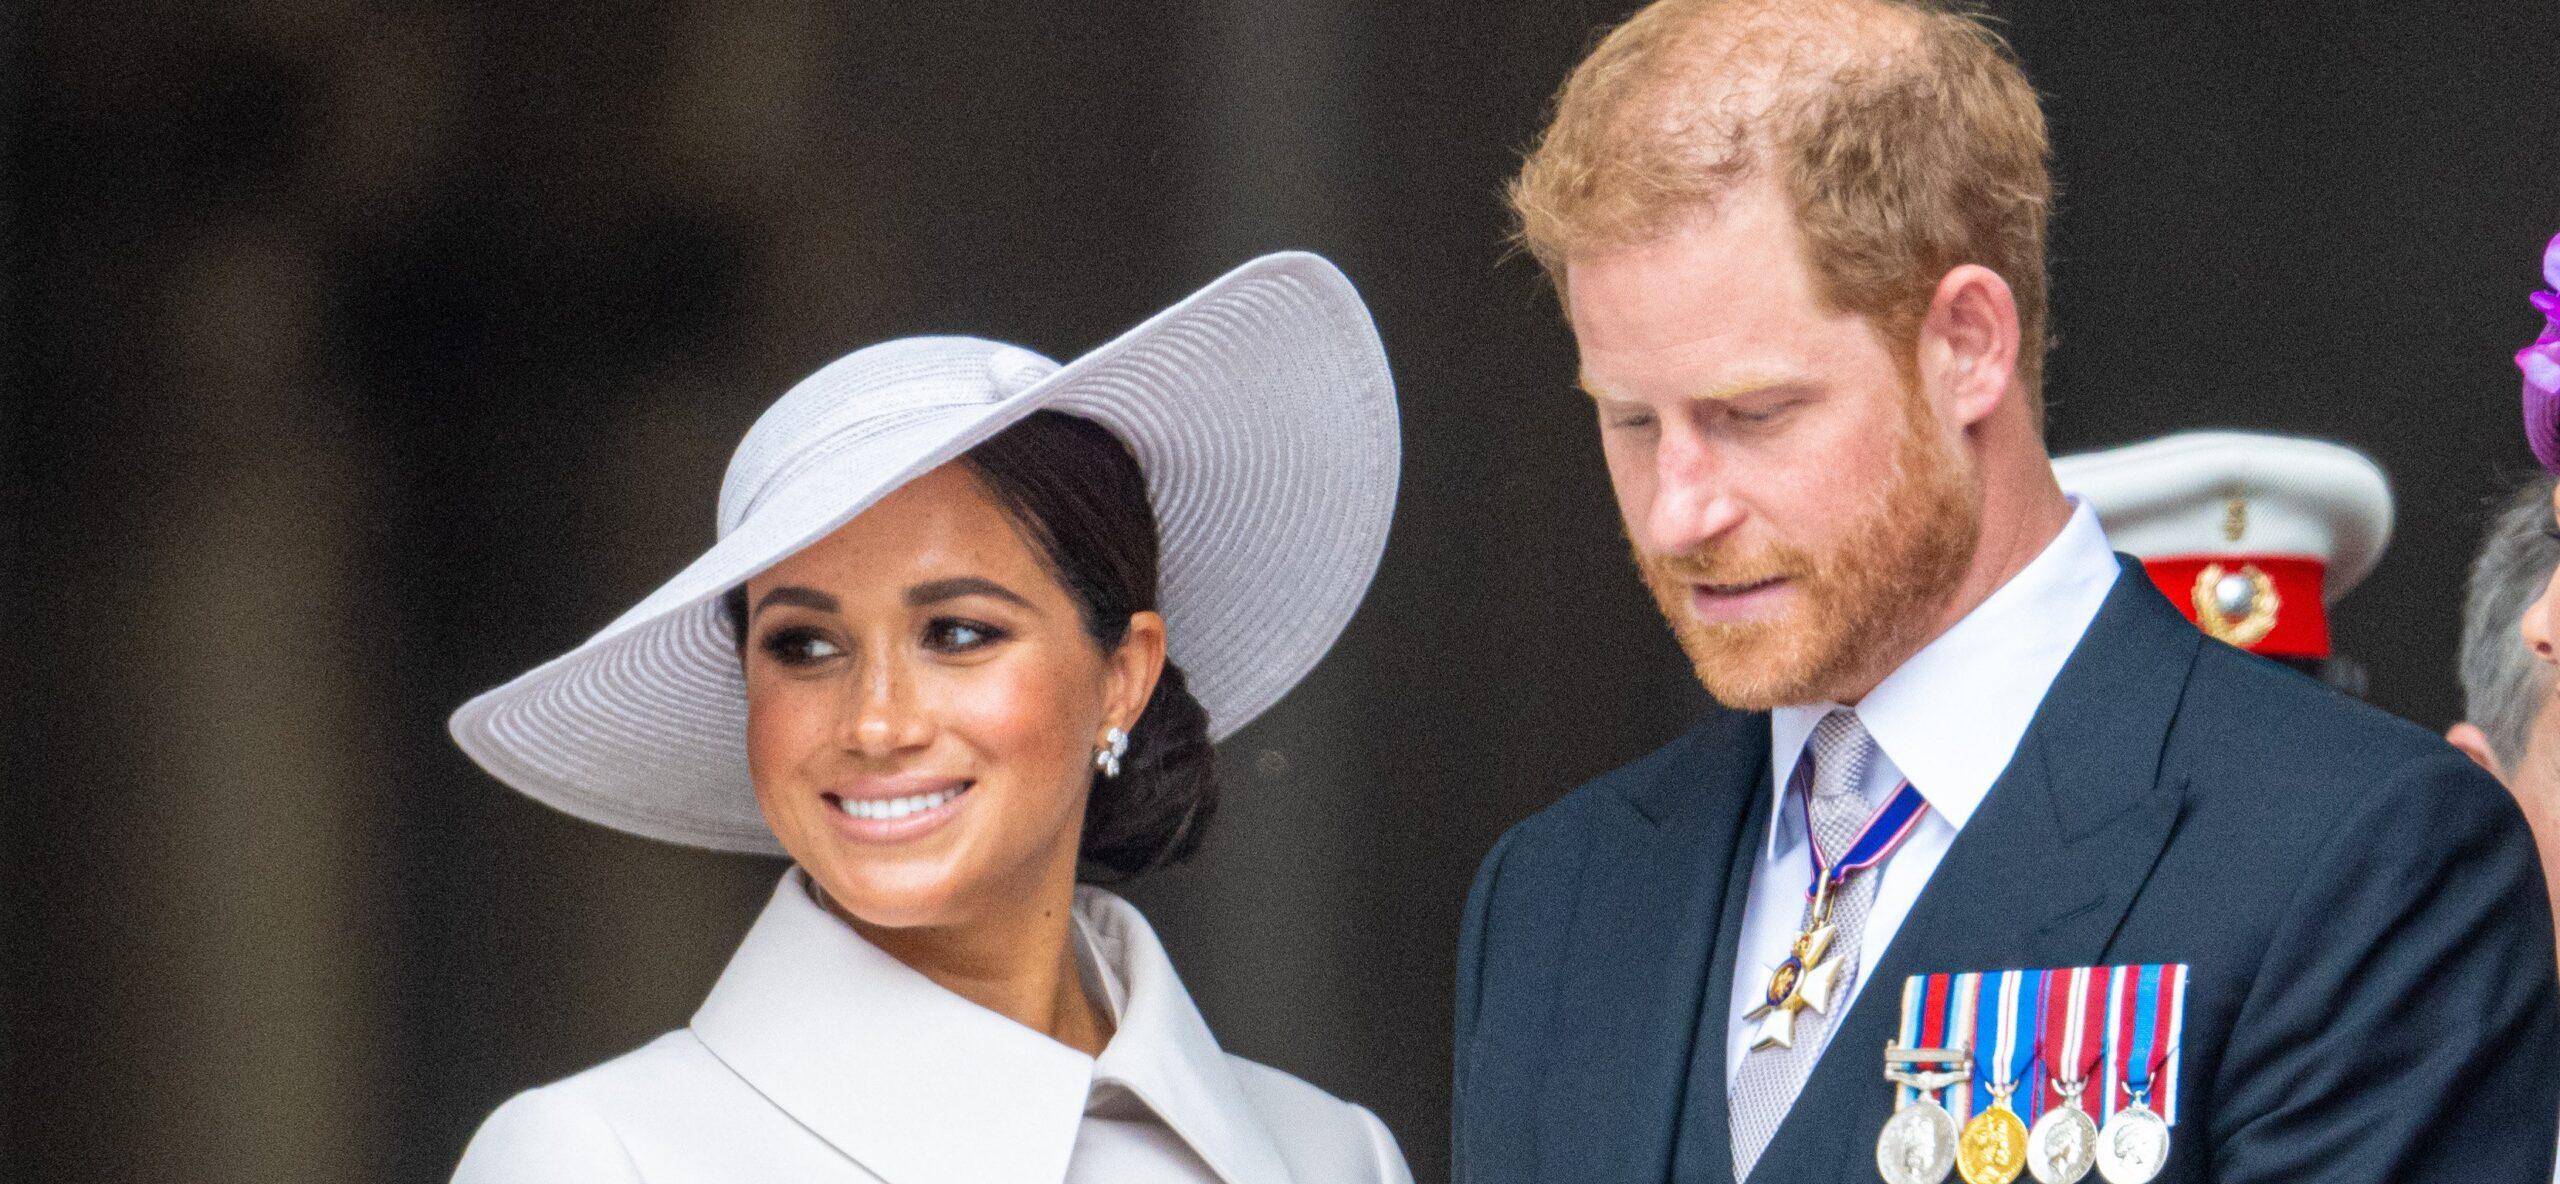 Prince Harry And Meghan Markle Allegedly Being ‘Pulled Apart’ By Clashing Views On Money